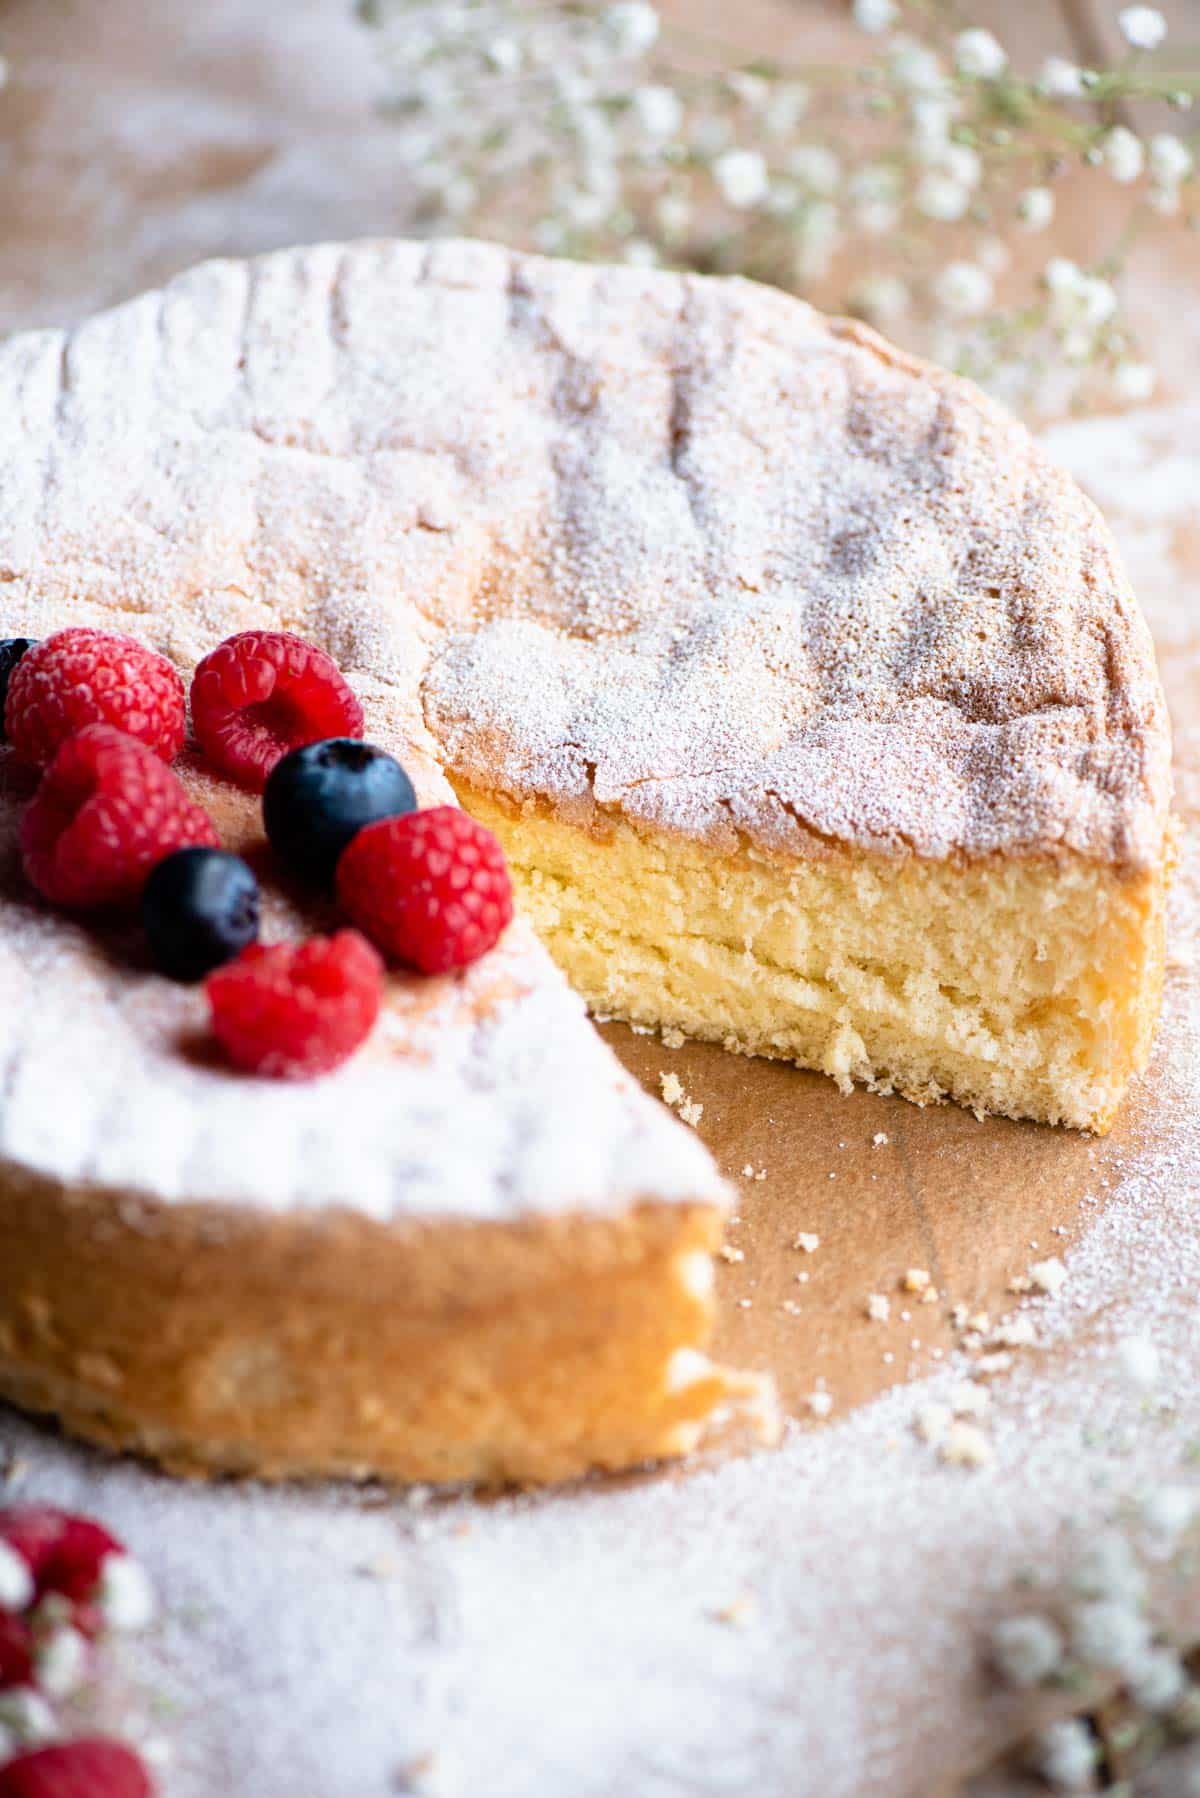 A close up of an Italian Pan di Spagna sponge cake with a slice cut out and berries on the top.